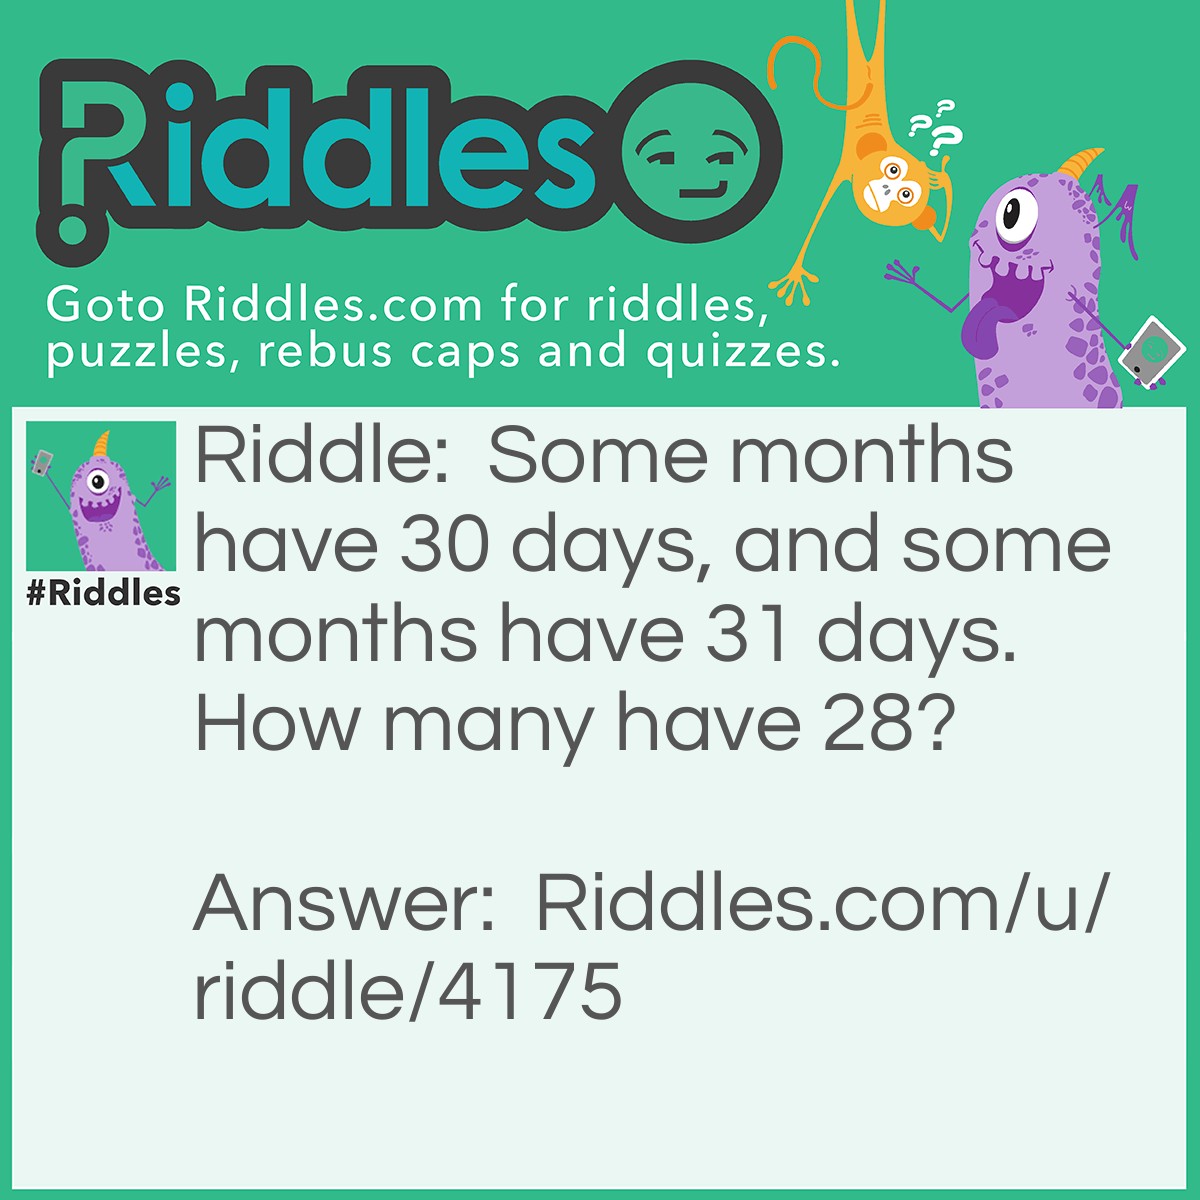 Riddle: Some months have 30 days, and some months have 31 days. How many have 28? Answer: All of them.